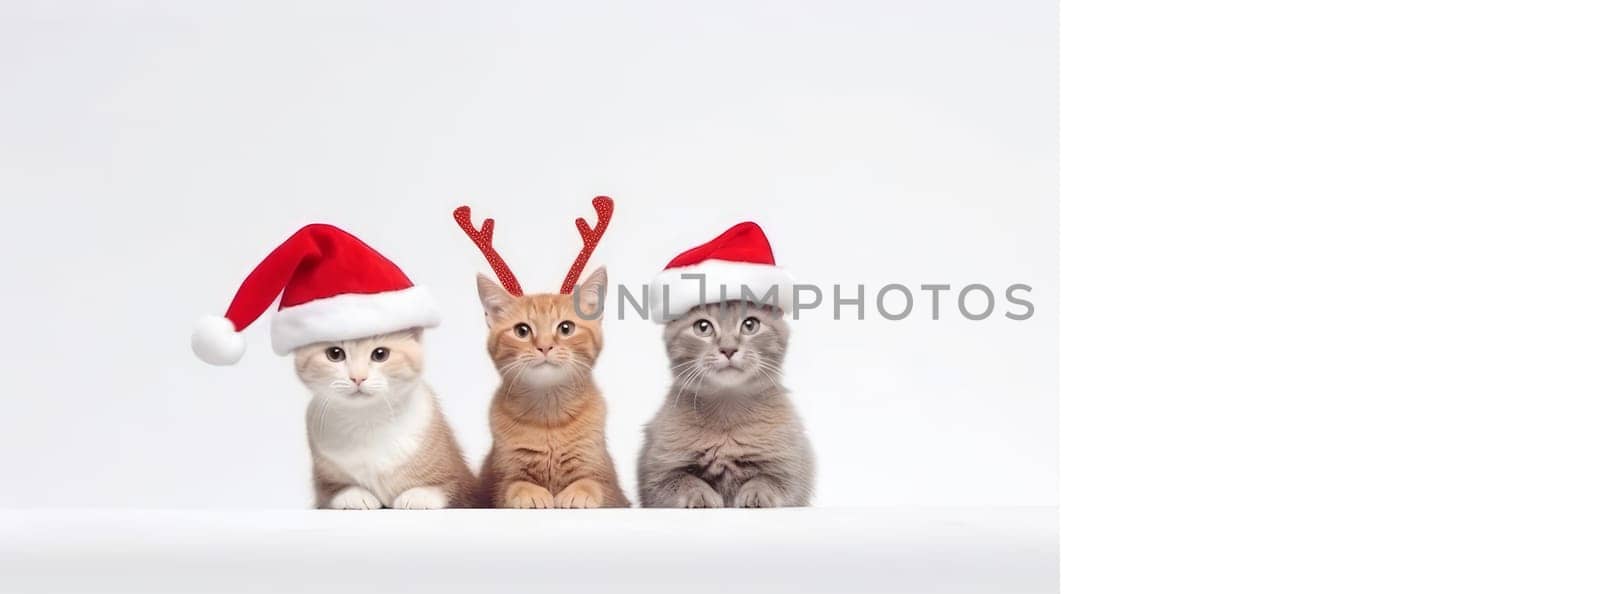 Cats and kittens celebrating the Christmas holidays in a red santa claus hat, reindeer antlers and a red gift ribbon on a white background. AI generated